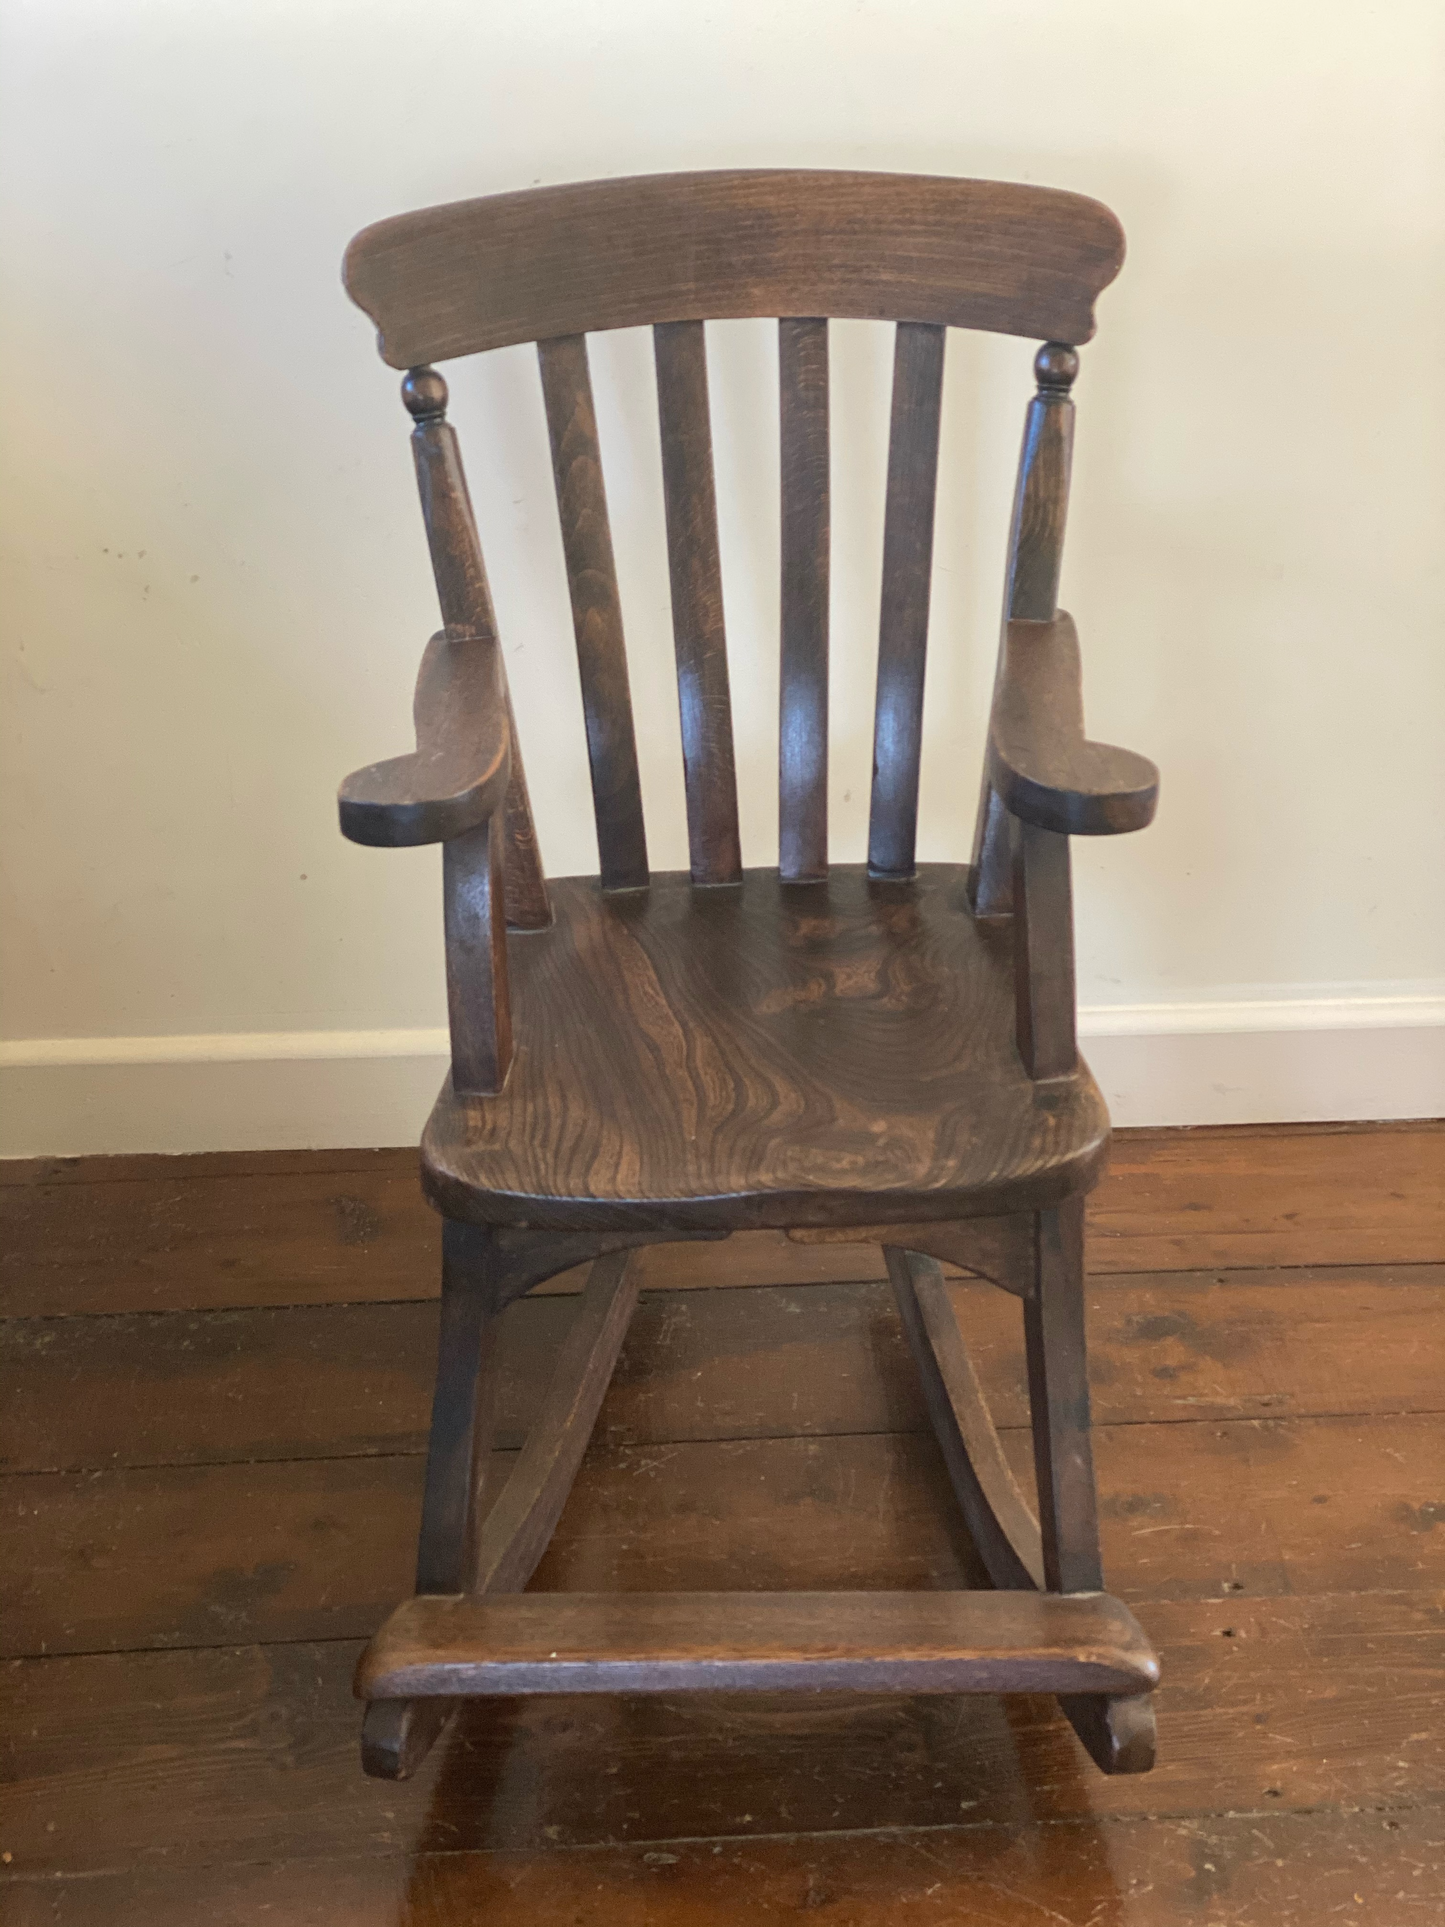 Hand-made Solid Wood Child's Rocking Chair